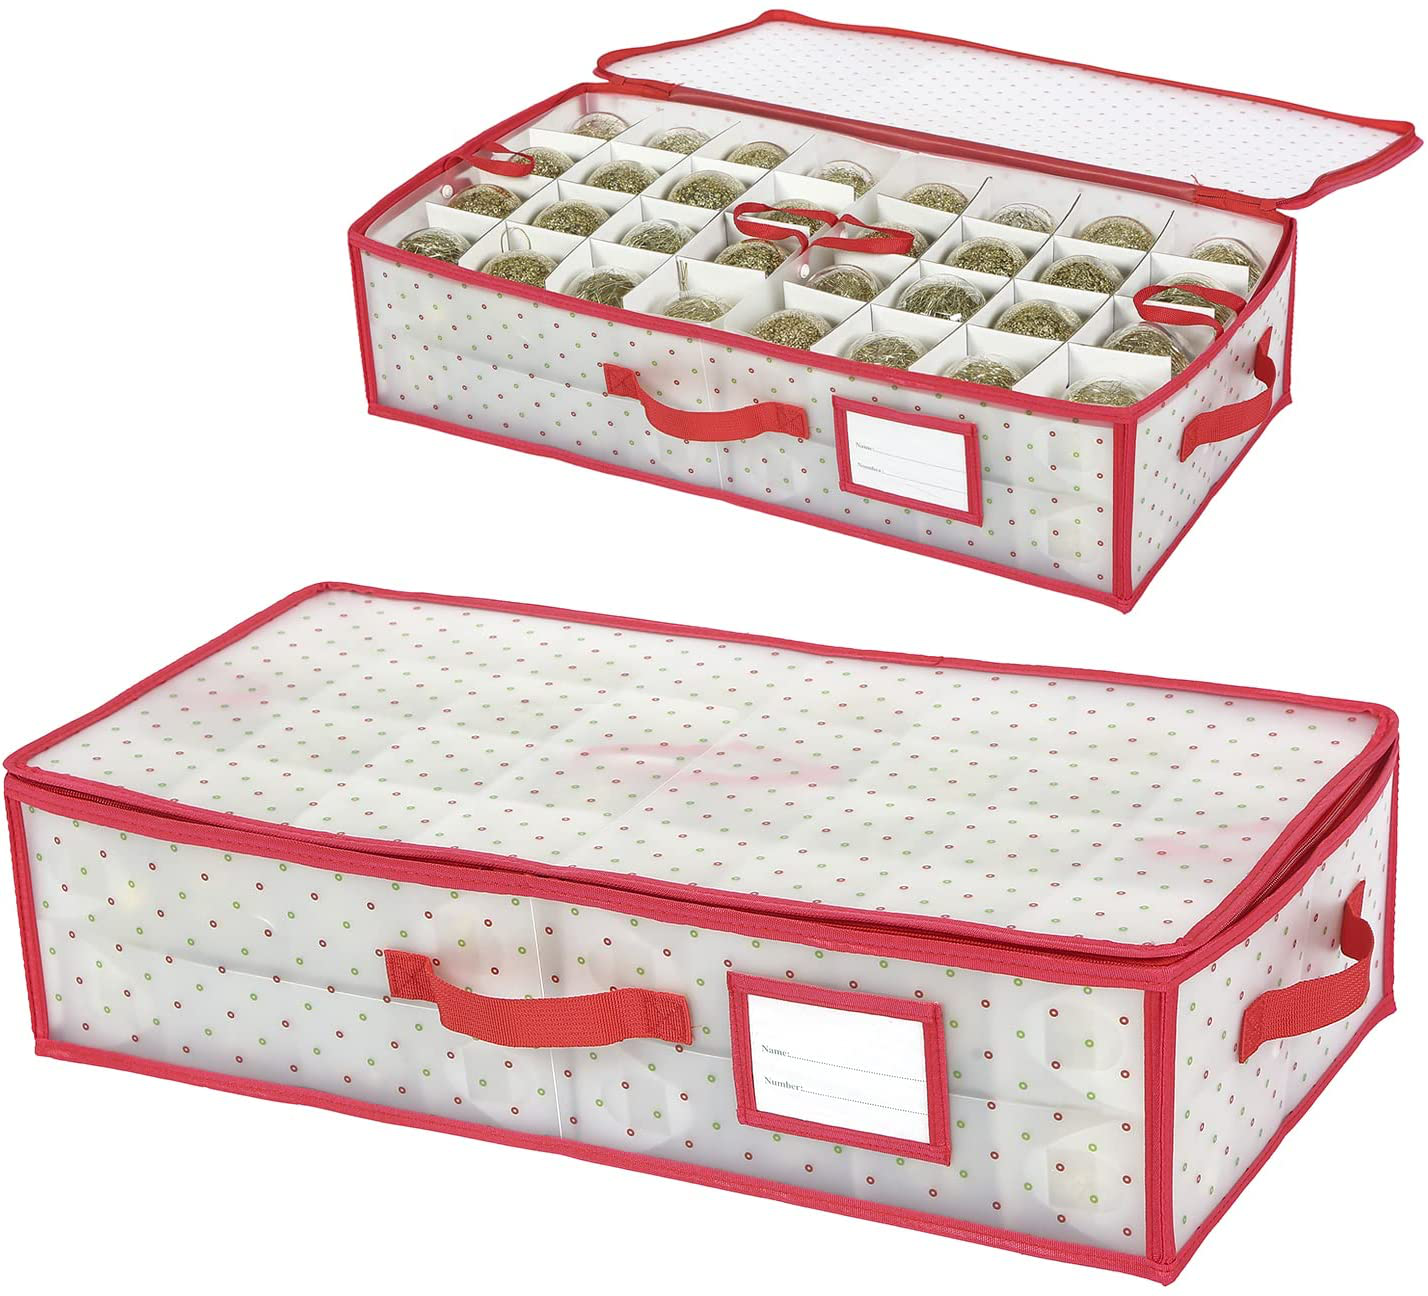 Plastic Underbed Christmas Ornament Storage Box Zippered Closure for 3-Inch Standard Christmas Ornaments